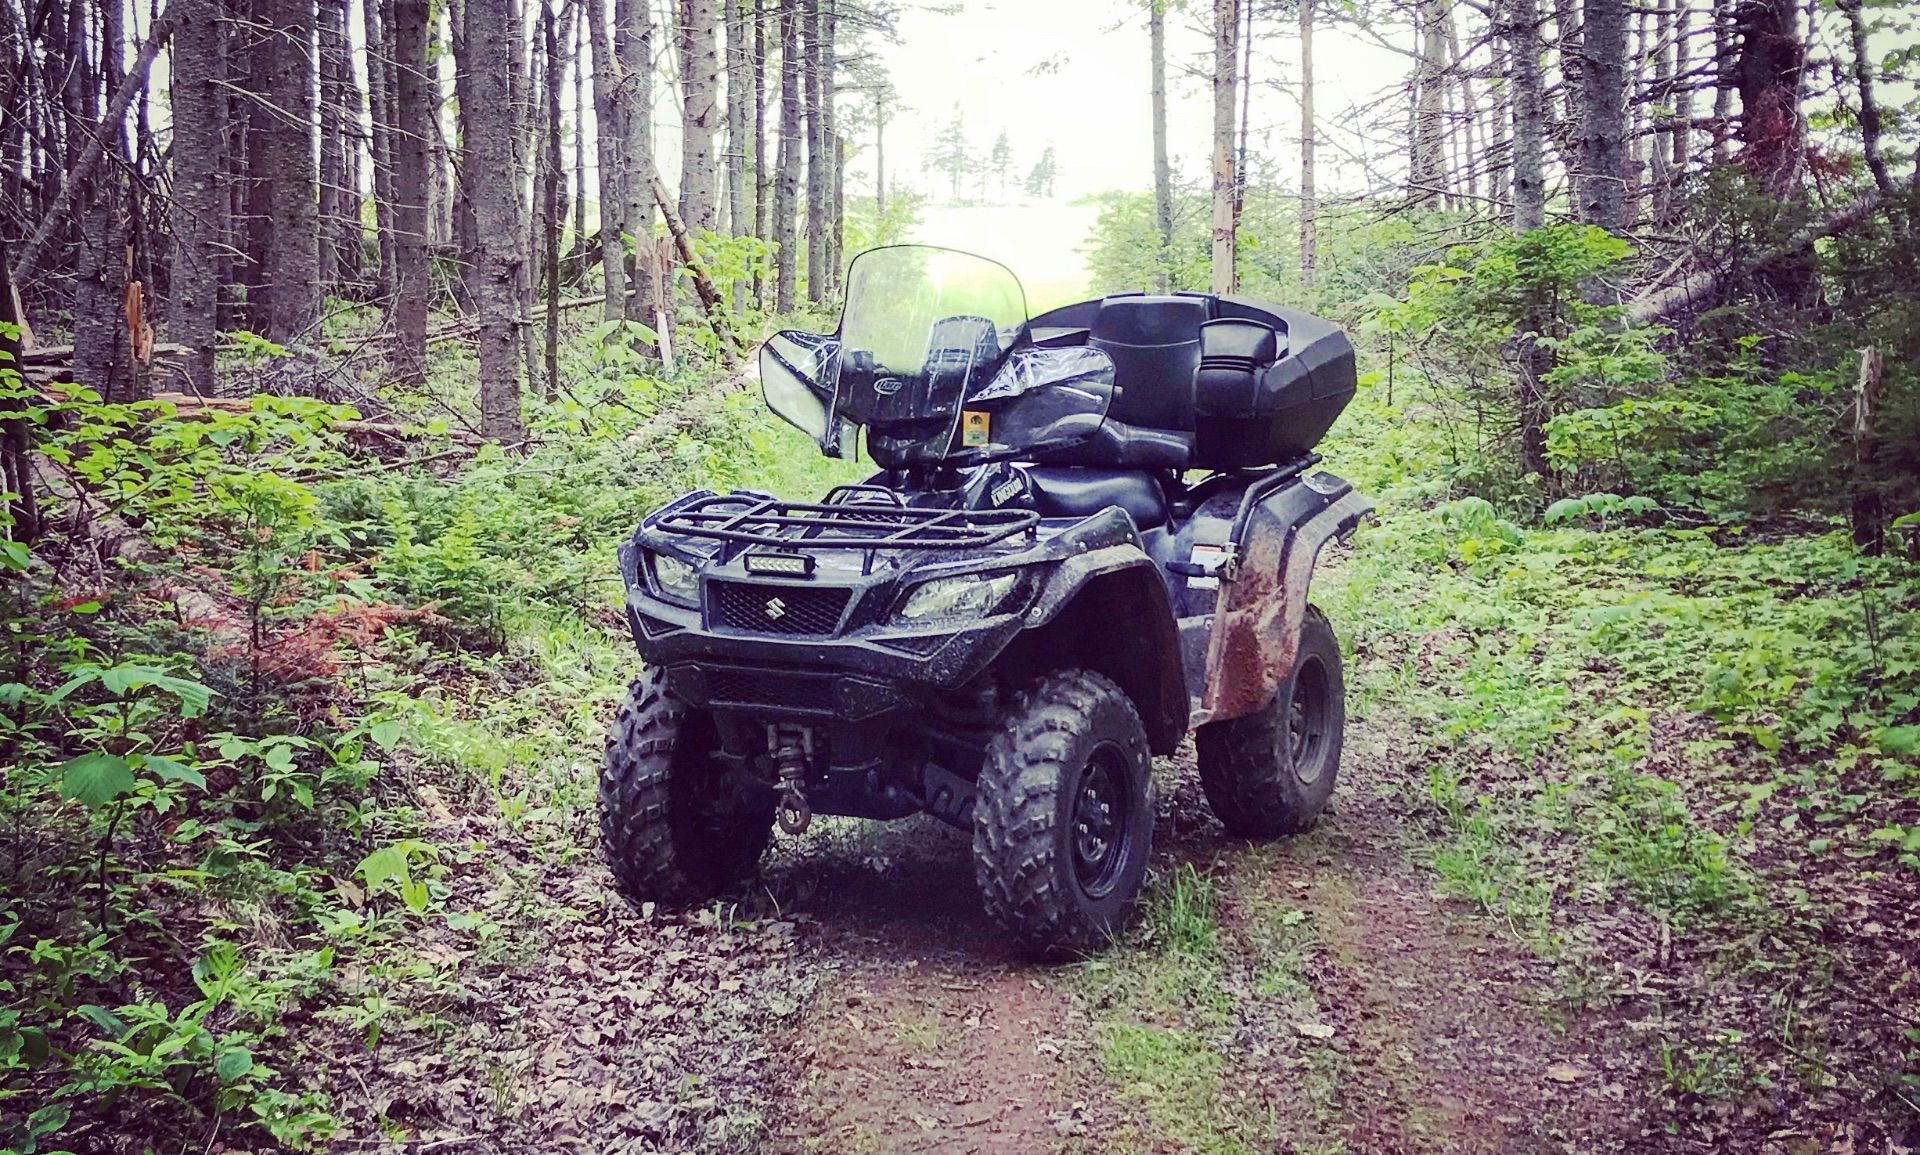 Cash For Quads: Centennial Auto-Sport And Tire Is Buying Used ATVs With Cash Money